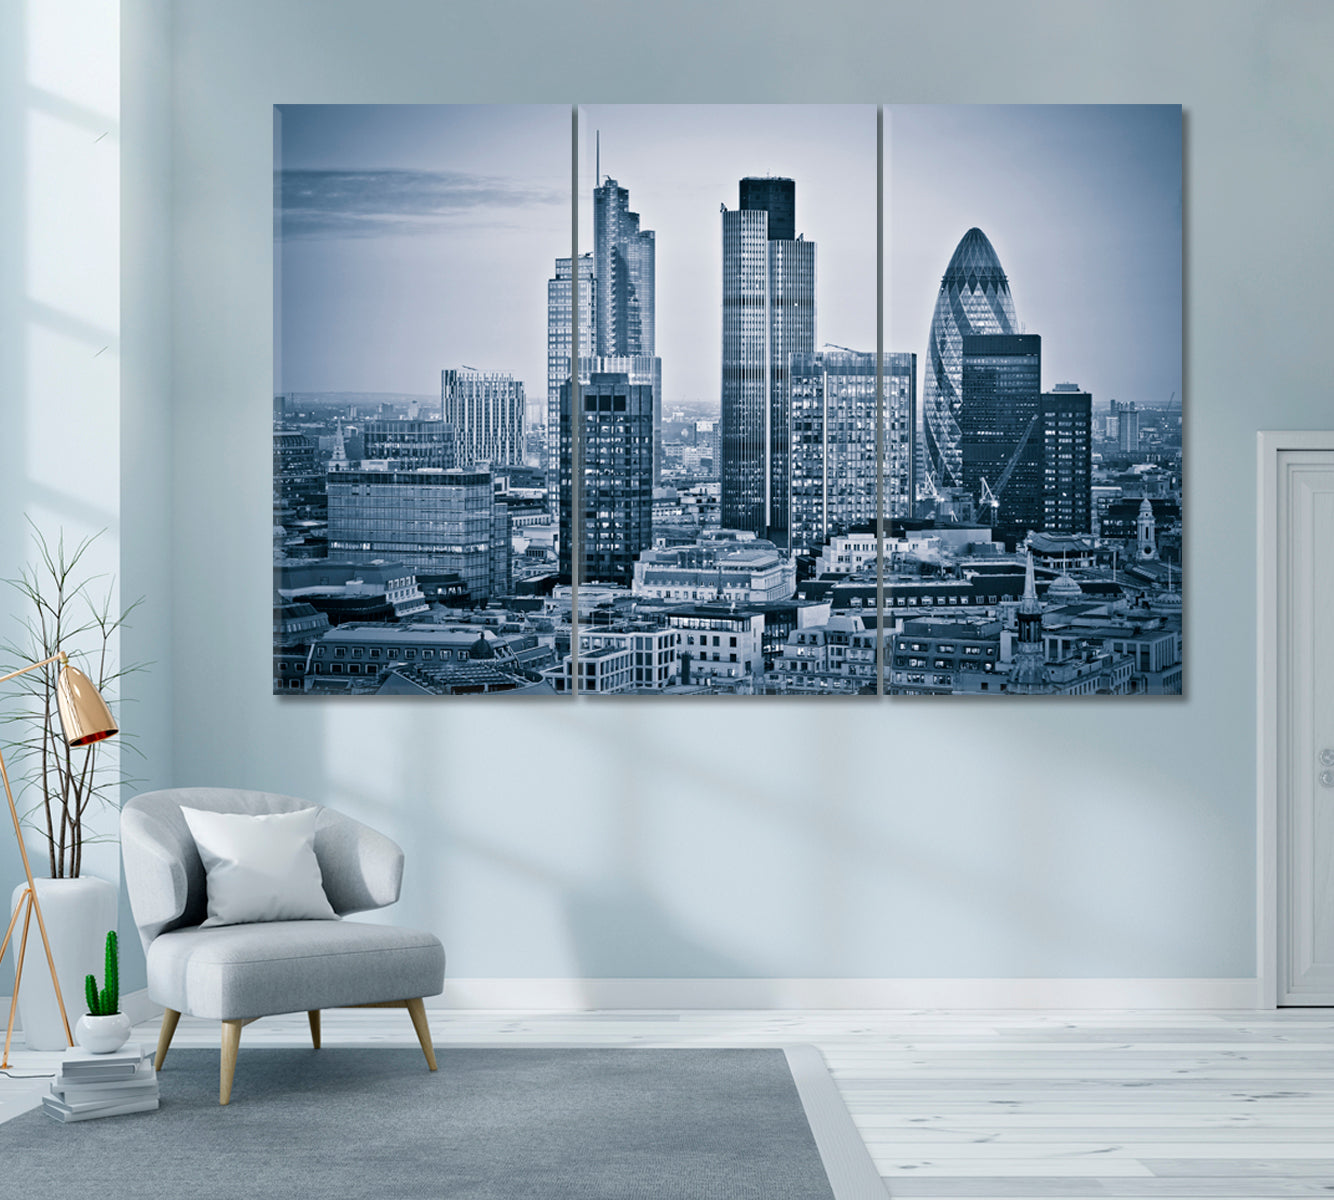 City of London Canvas Print ArtLexy 3 Panels 36"x24" inches 